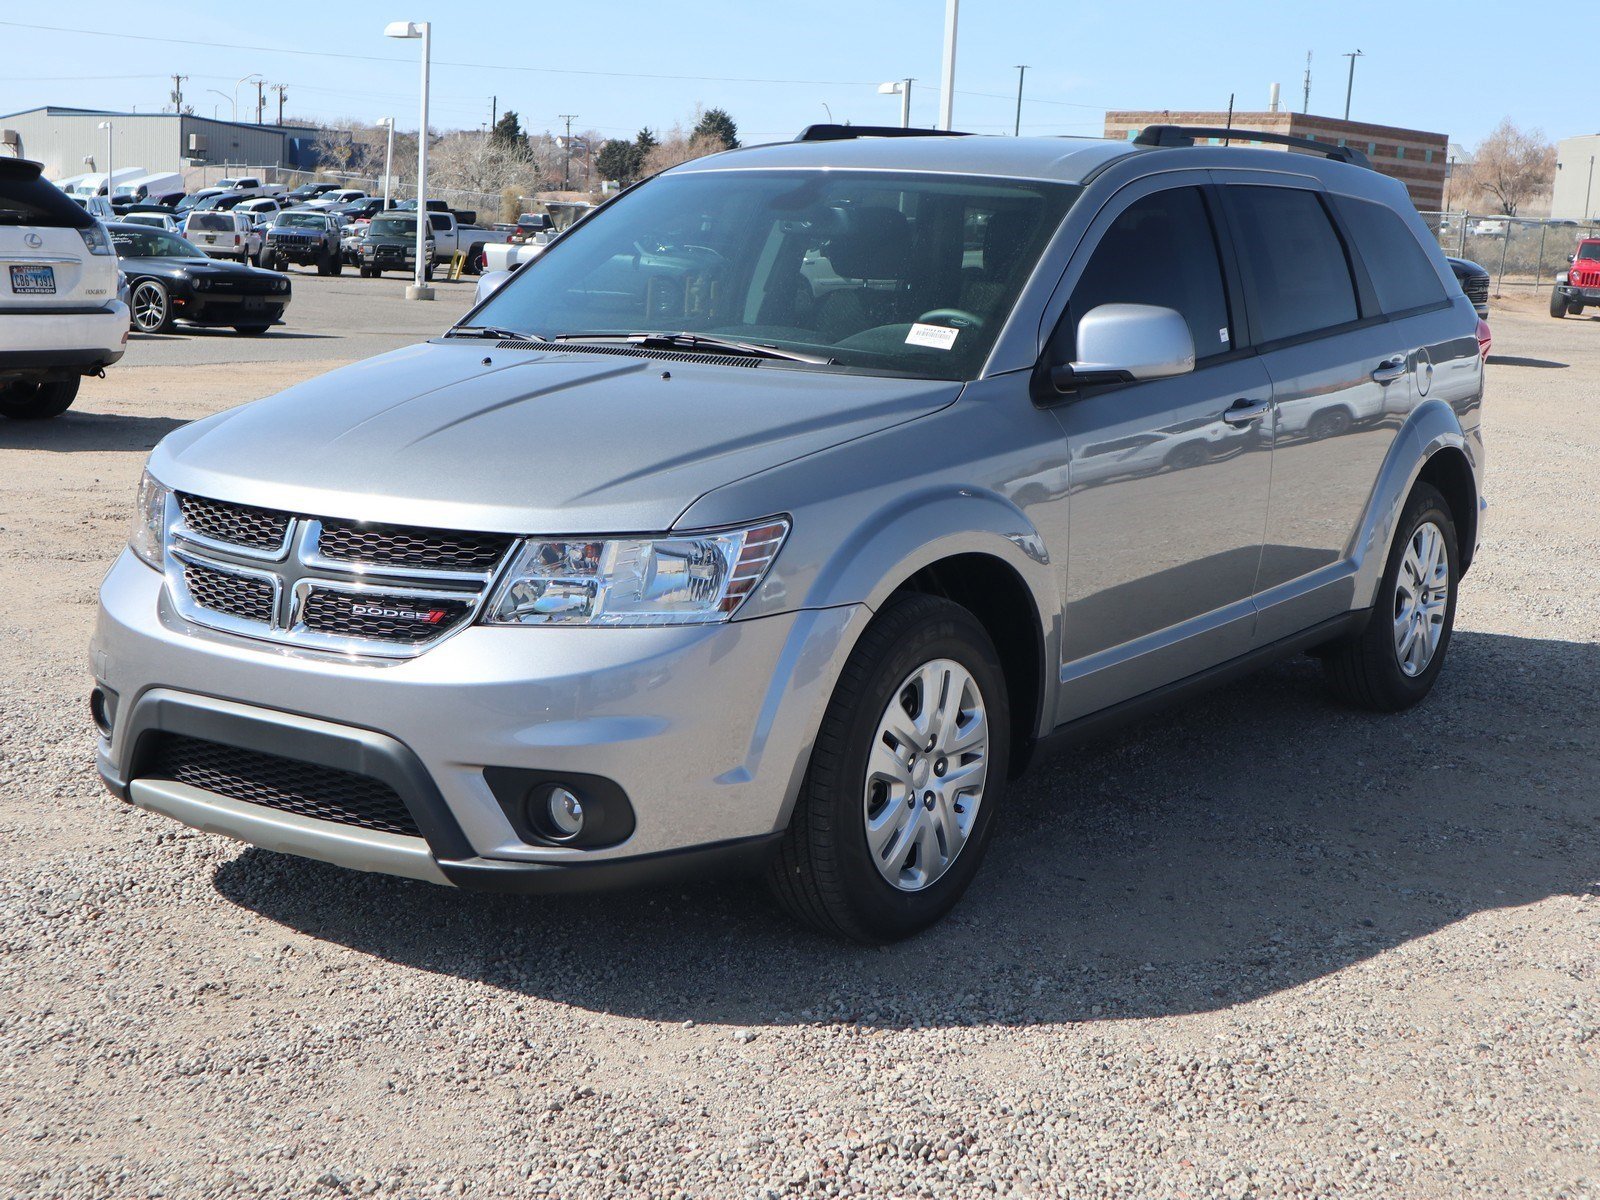 is a dodge journey 4x4